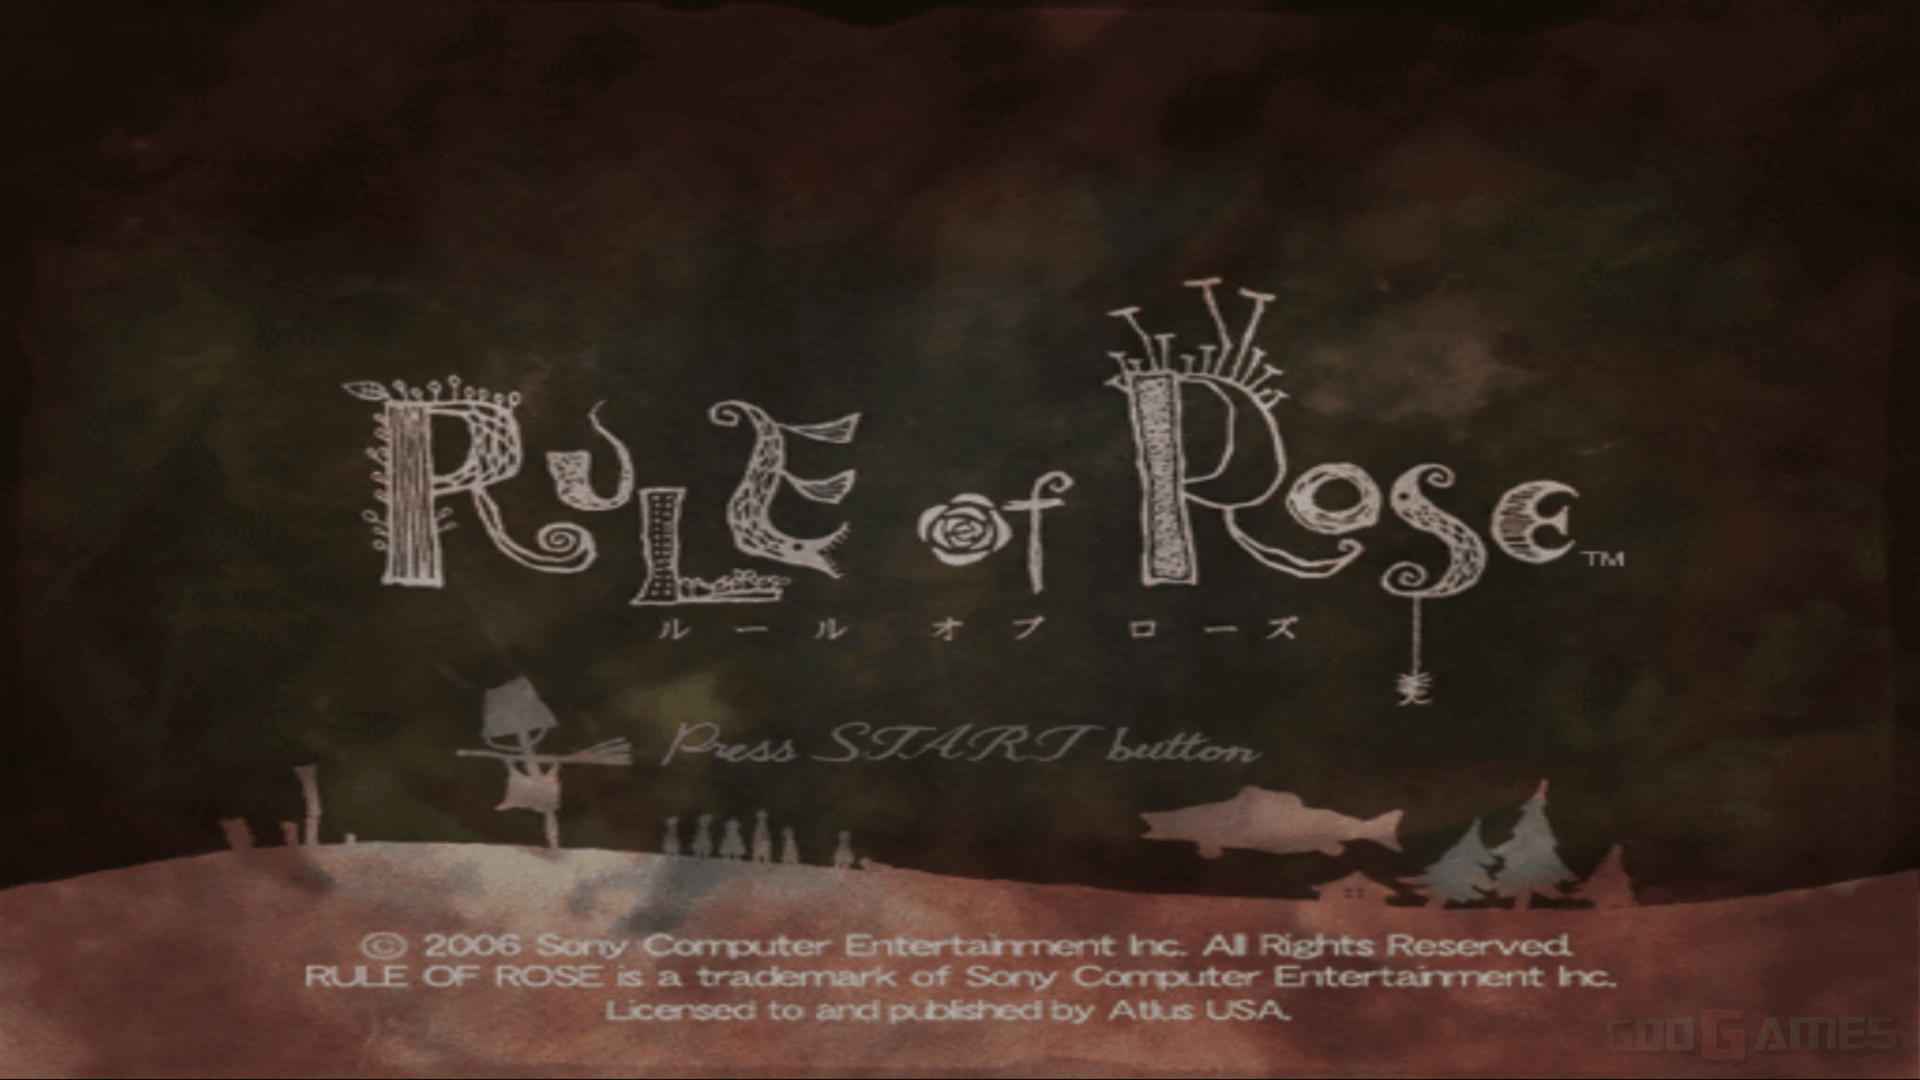 ps2 rule of rose